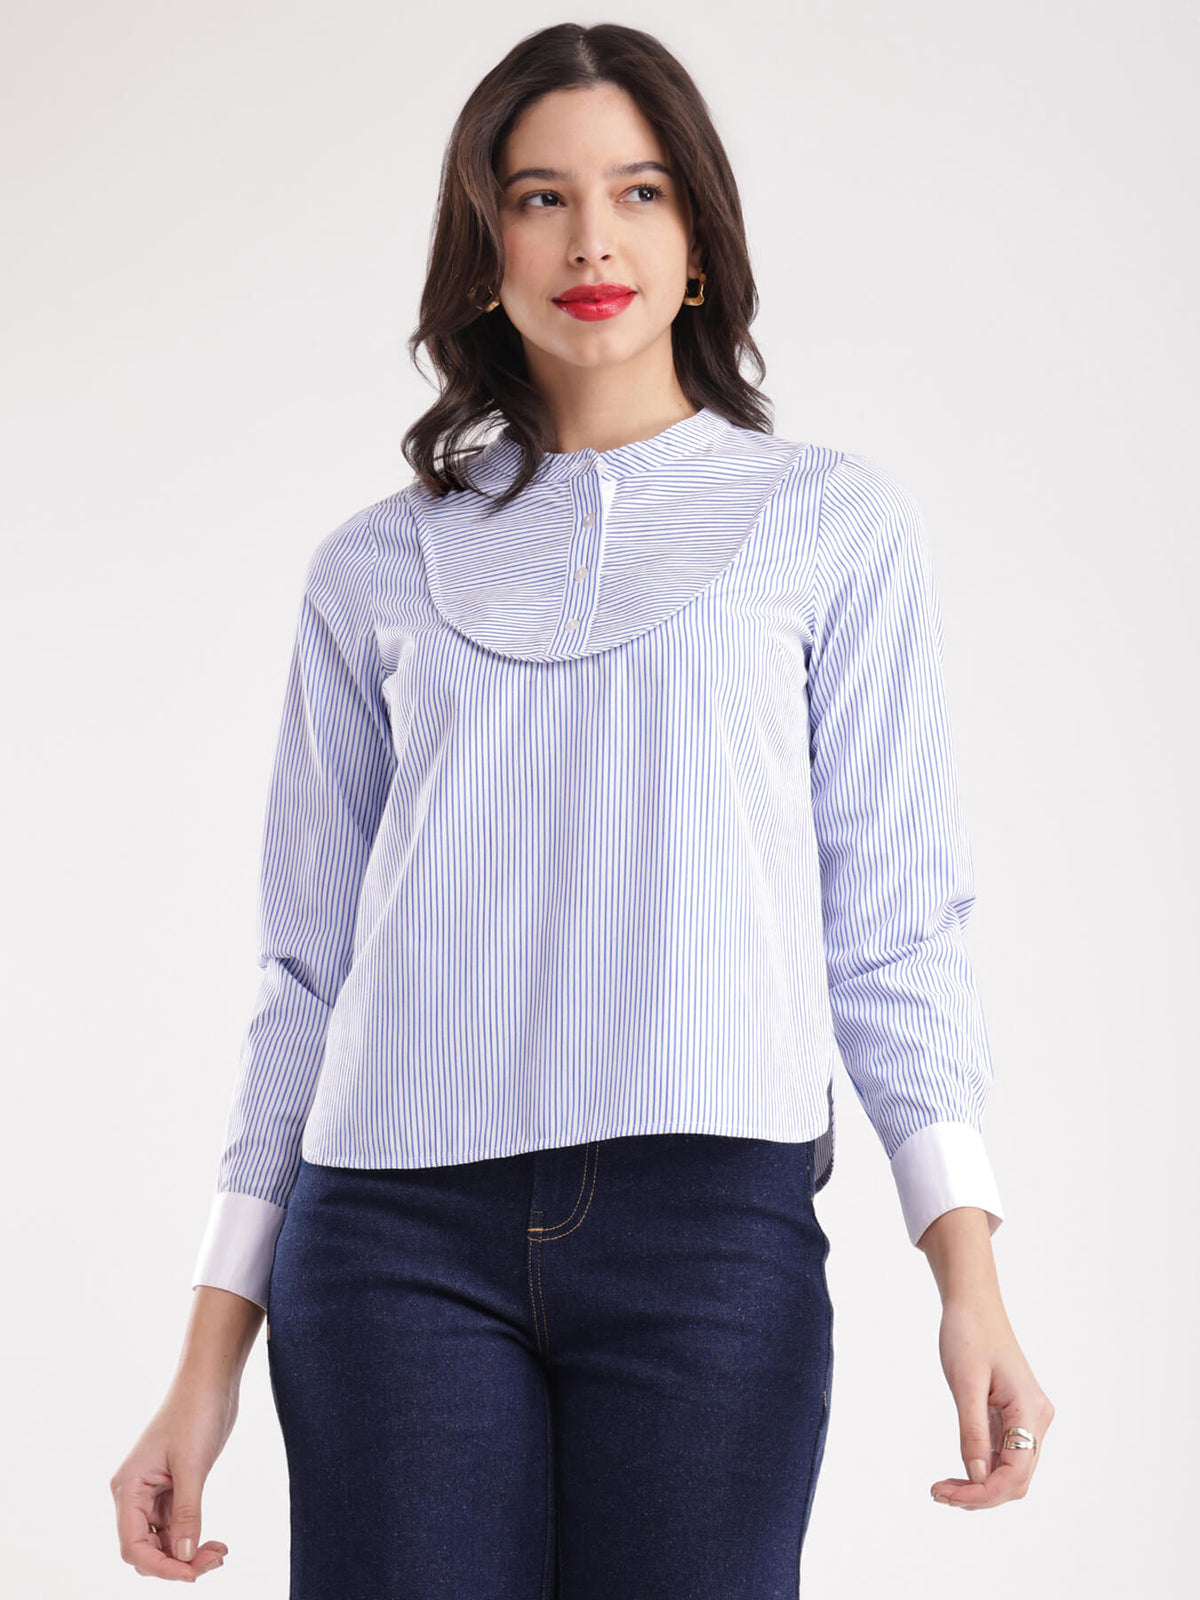 Cotton Striped Top - Blue And White